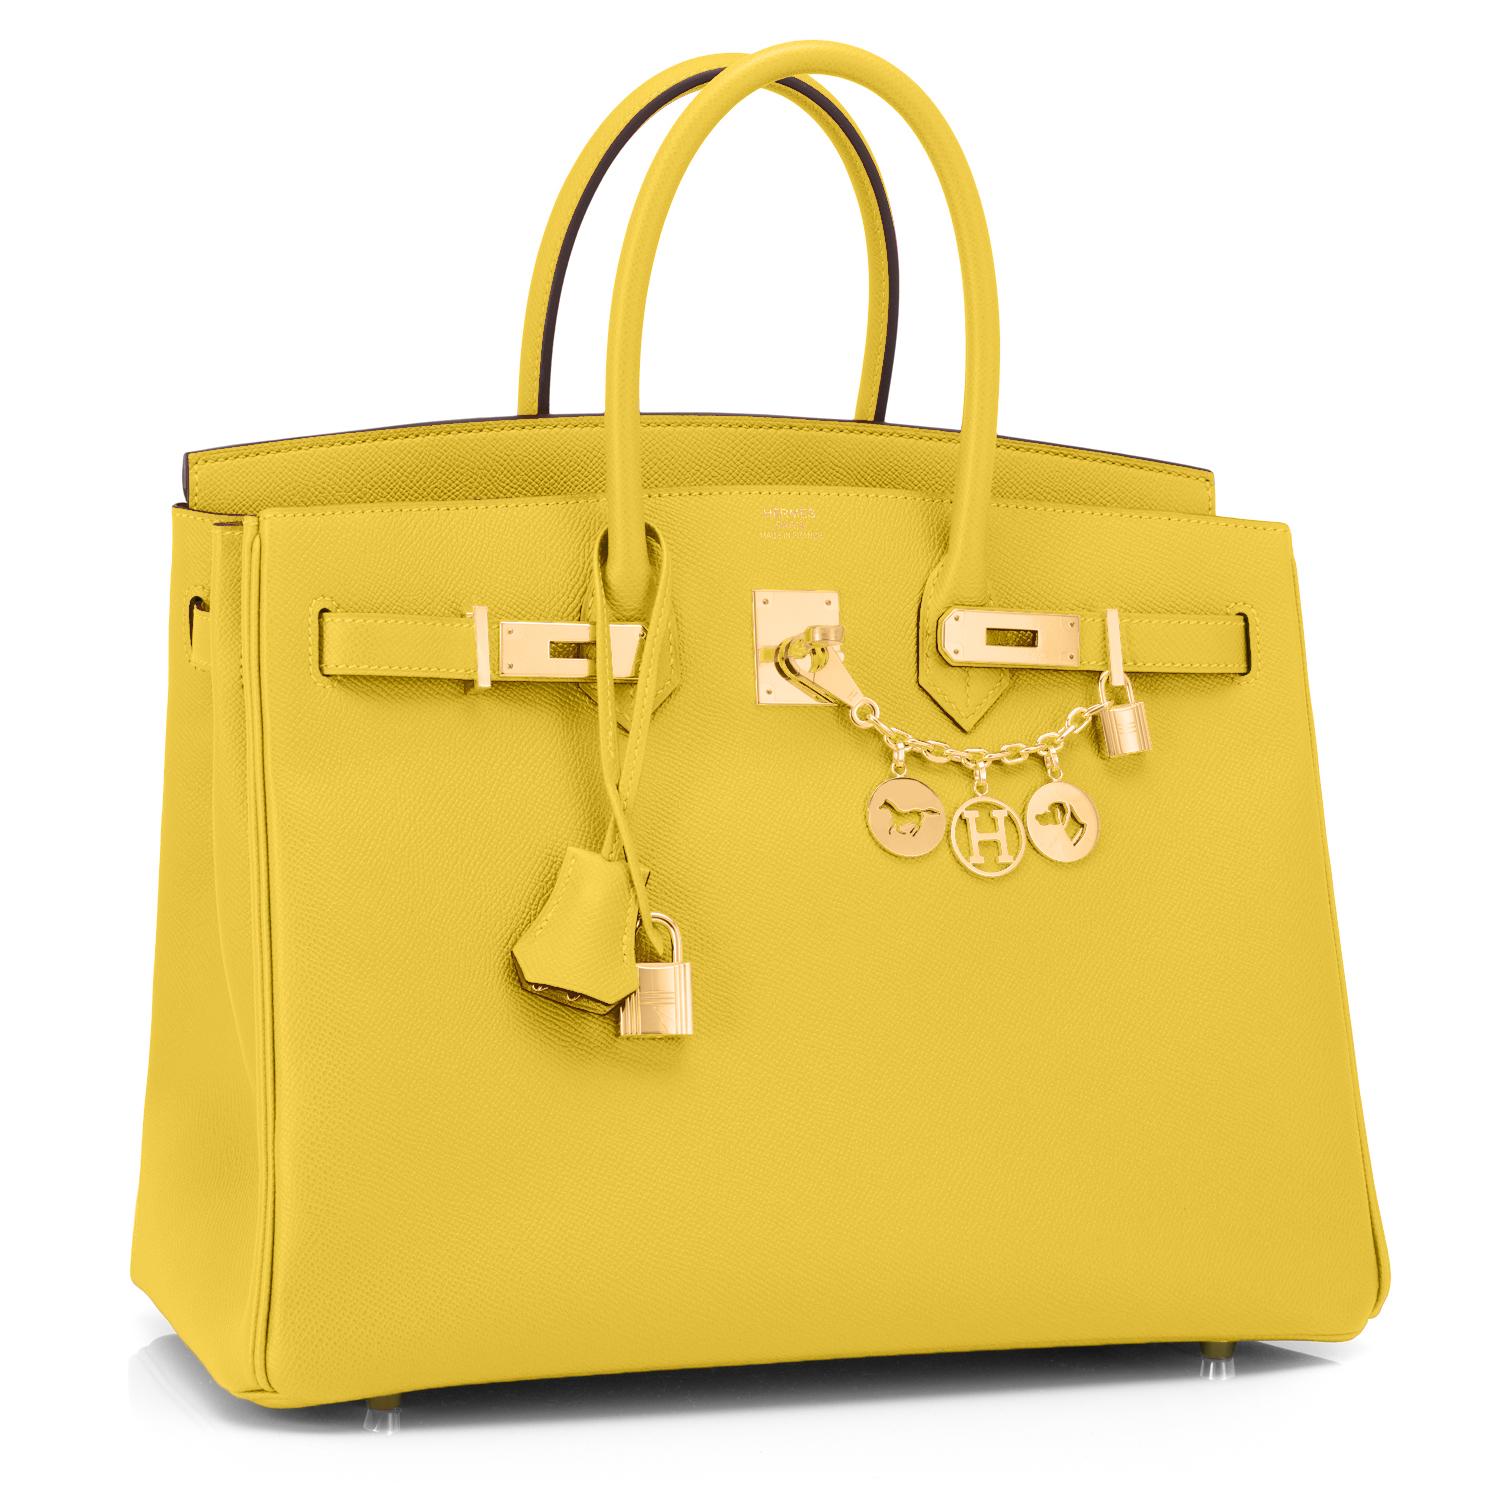 Guaranteed Authentic Hermes Lime 35cm Birkin Epsom Gold Hardware 
Brand New in Box. Pristine condition (with plastic on hardware). 
Perfect gift! Coming full set with keys, lock, clochette, a sleeper for the bag, rain protector, and orange Hermes